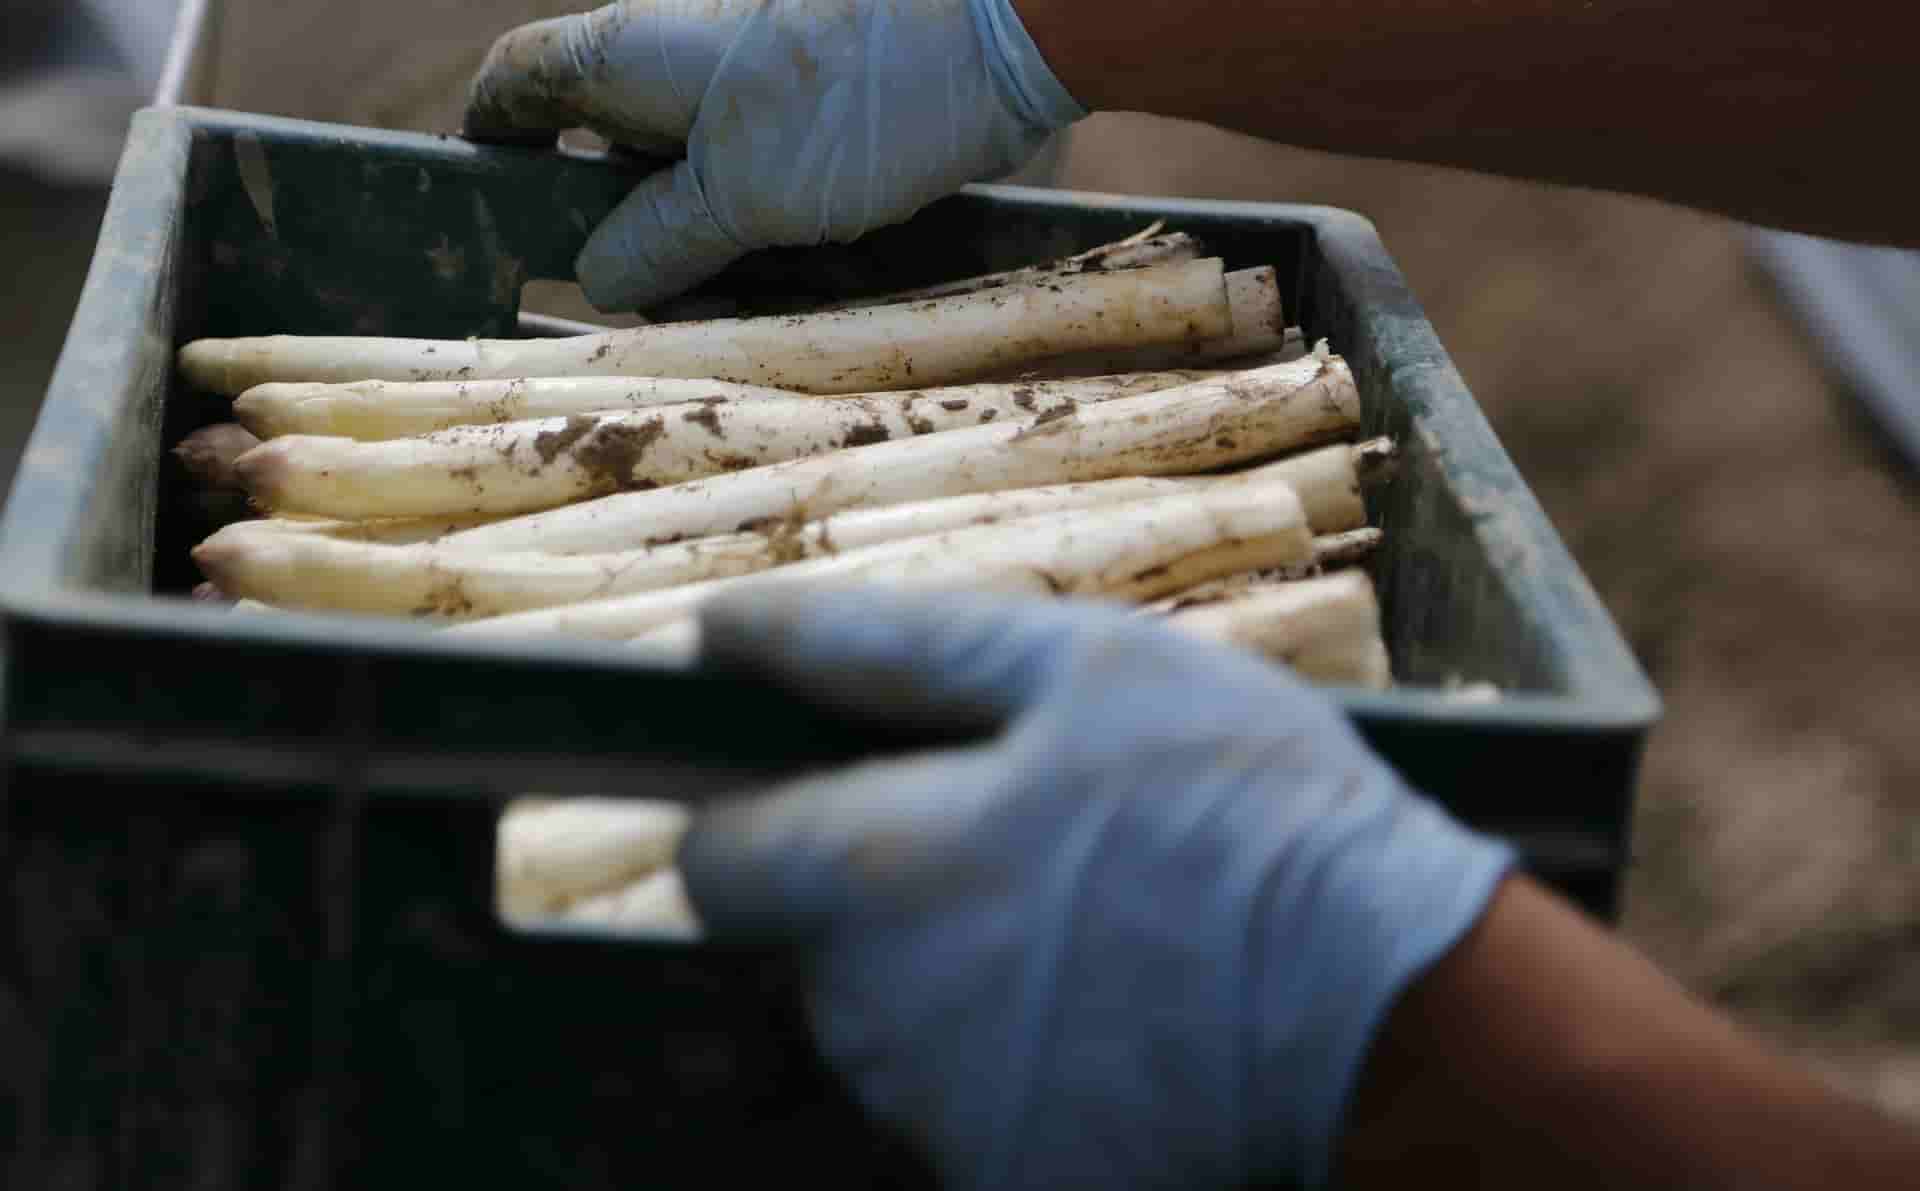 white asparagus harvested from the fields_spargelzeit_asparagus time_the best way to cook white asparagus in a german way_my life in germany_hkwomanabroad-min